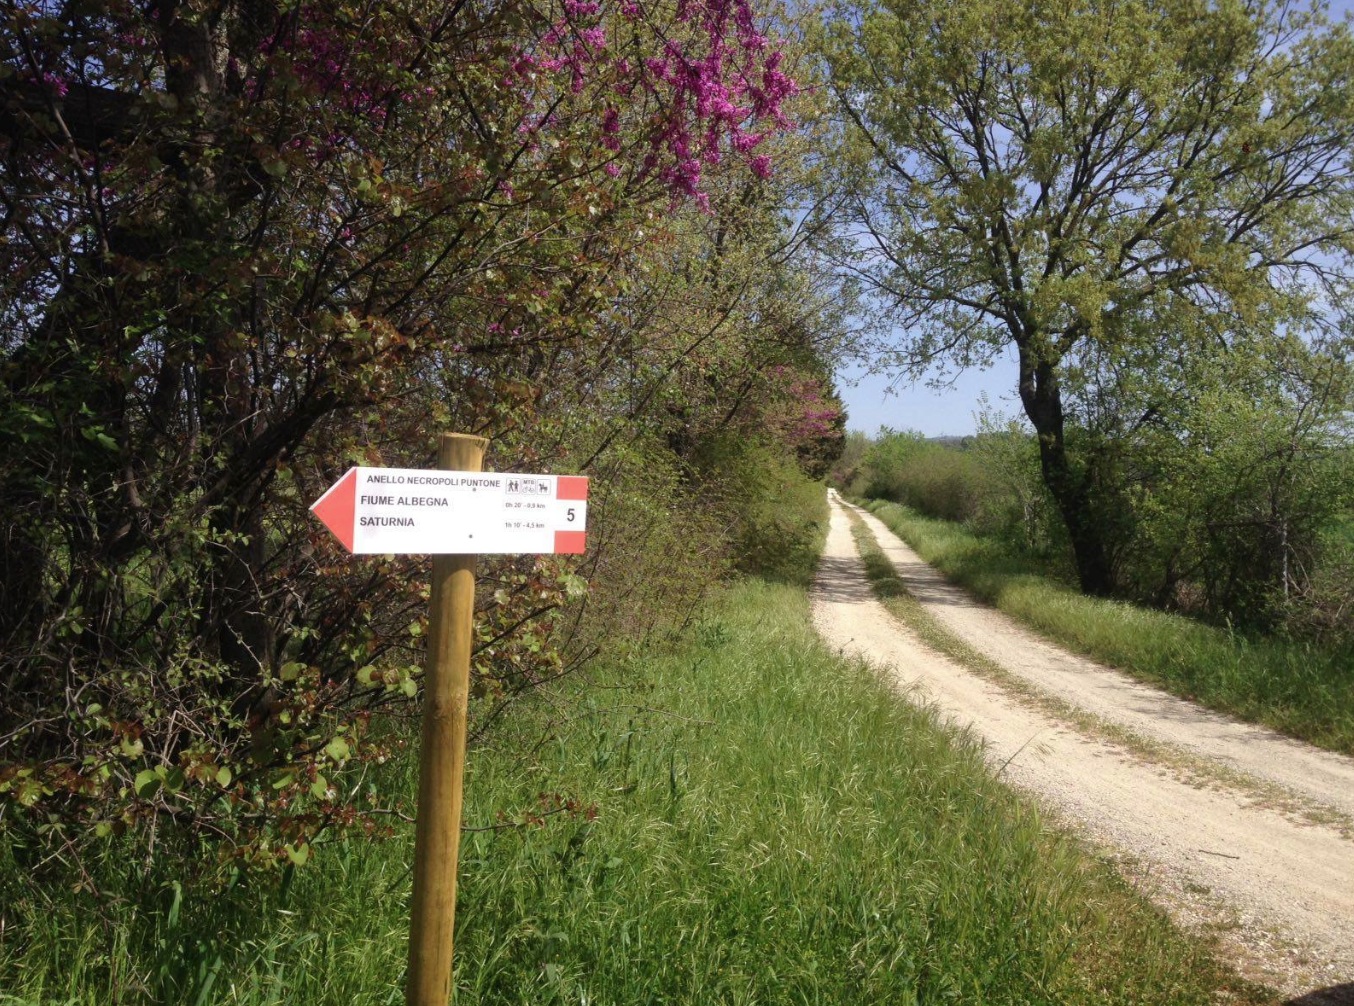 Check out the walking trails around Manciano